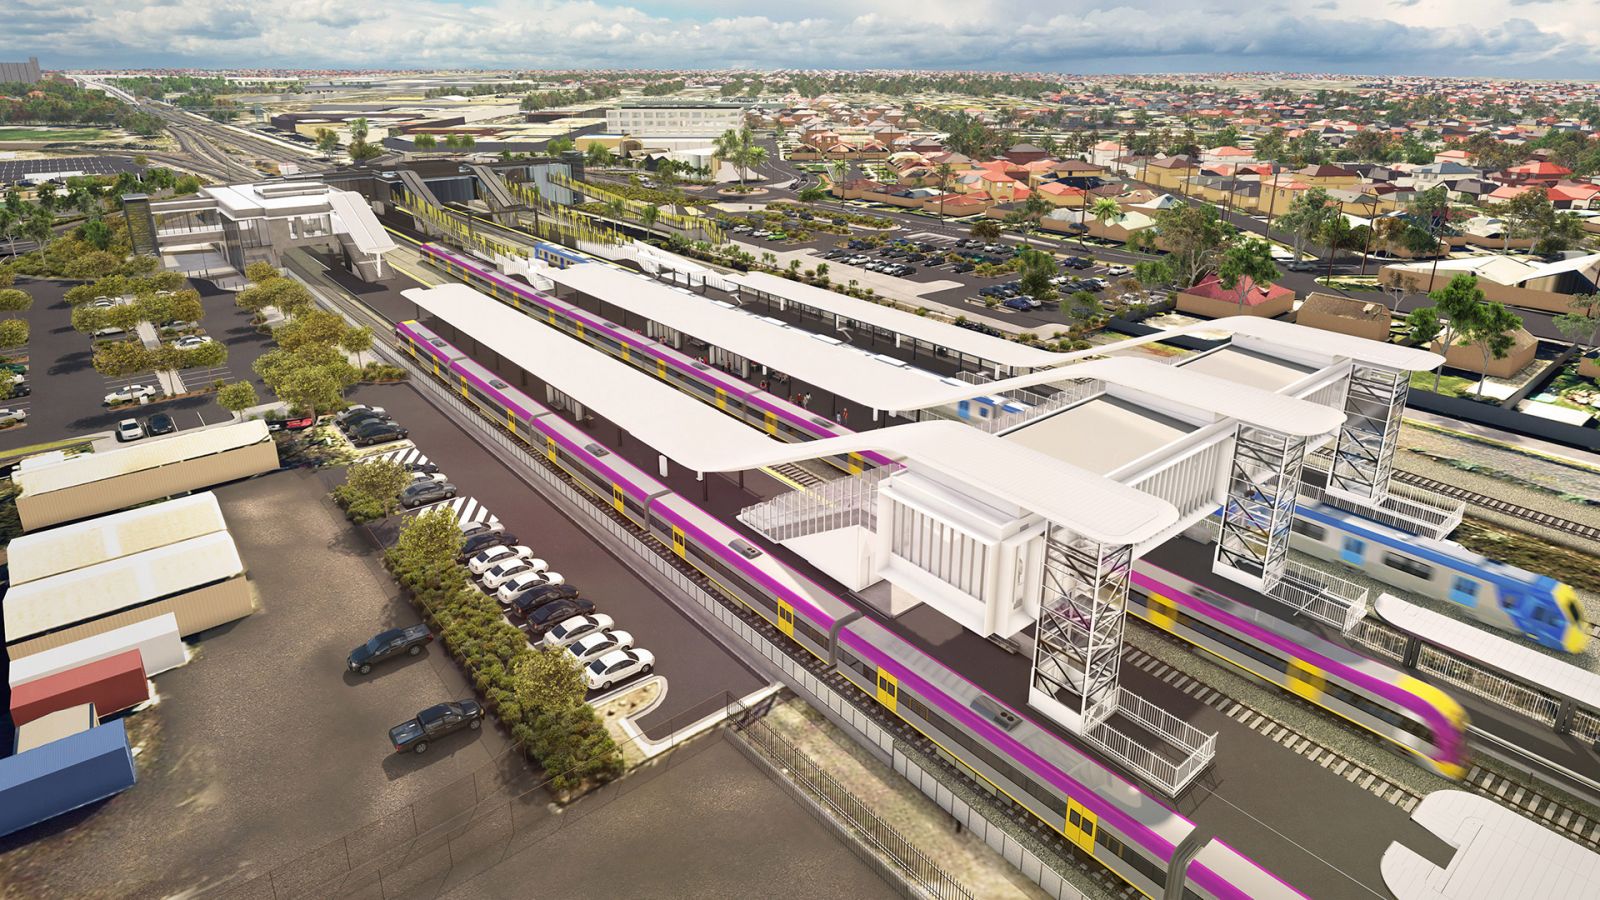 New regional platform at Sunshine Station, image also shows additional upgrades to the station to be delivered as part of Melbourne Airport Rail